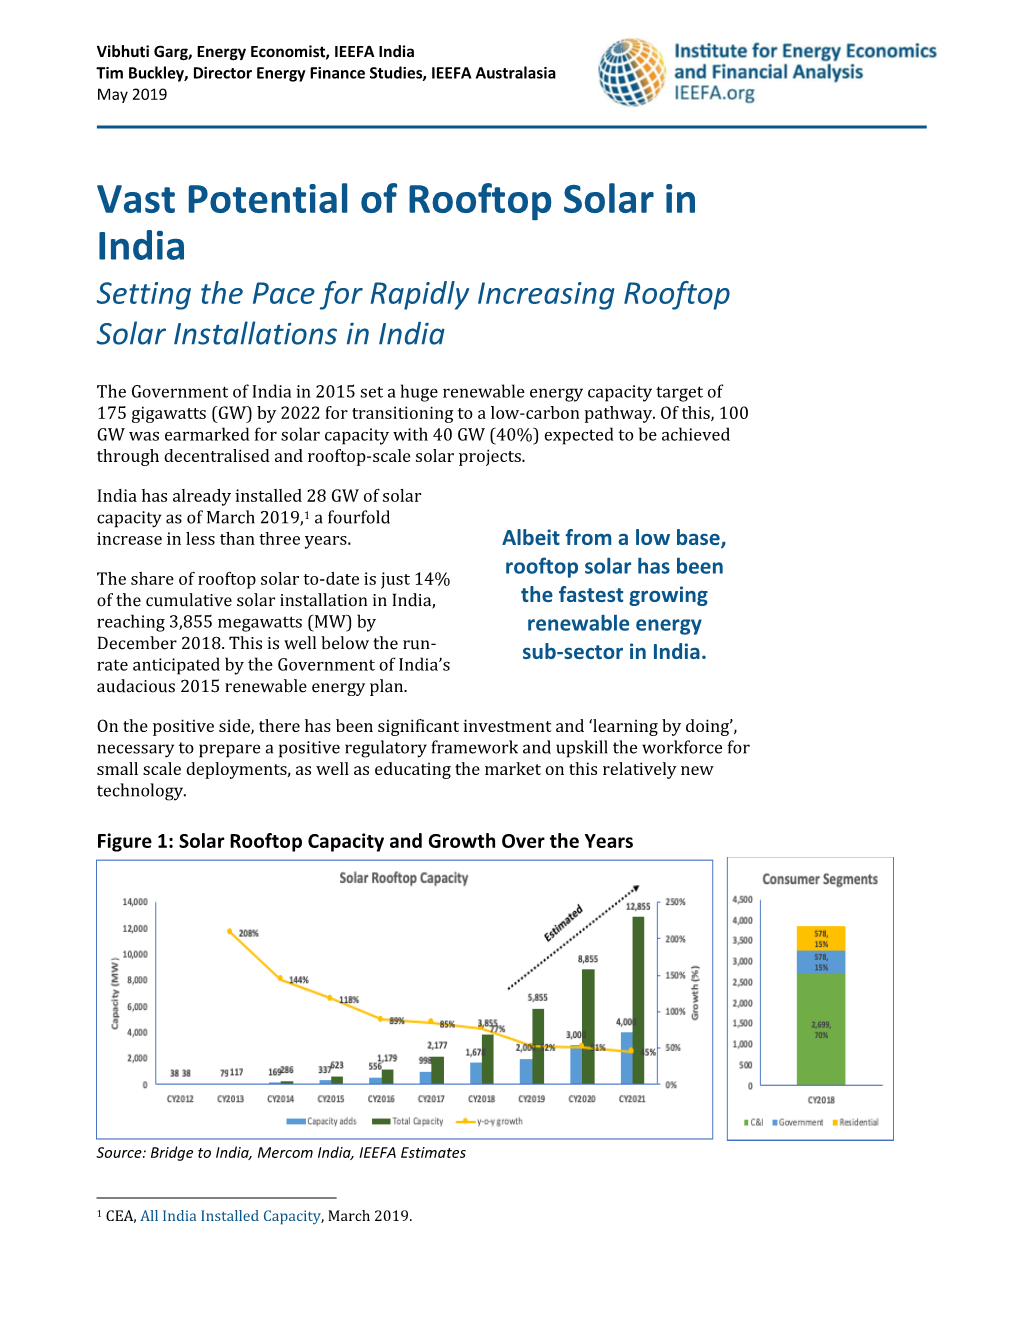 Vast Potential of Rooftop Solar in India Setting the Pace for Rapidly Increasing Rooftop Solar Installations in India